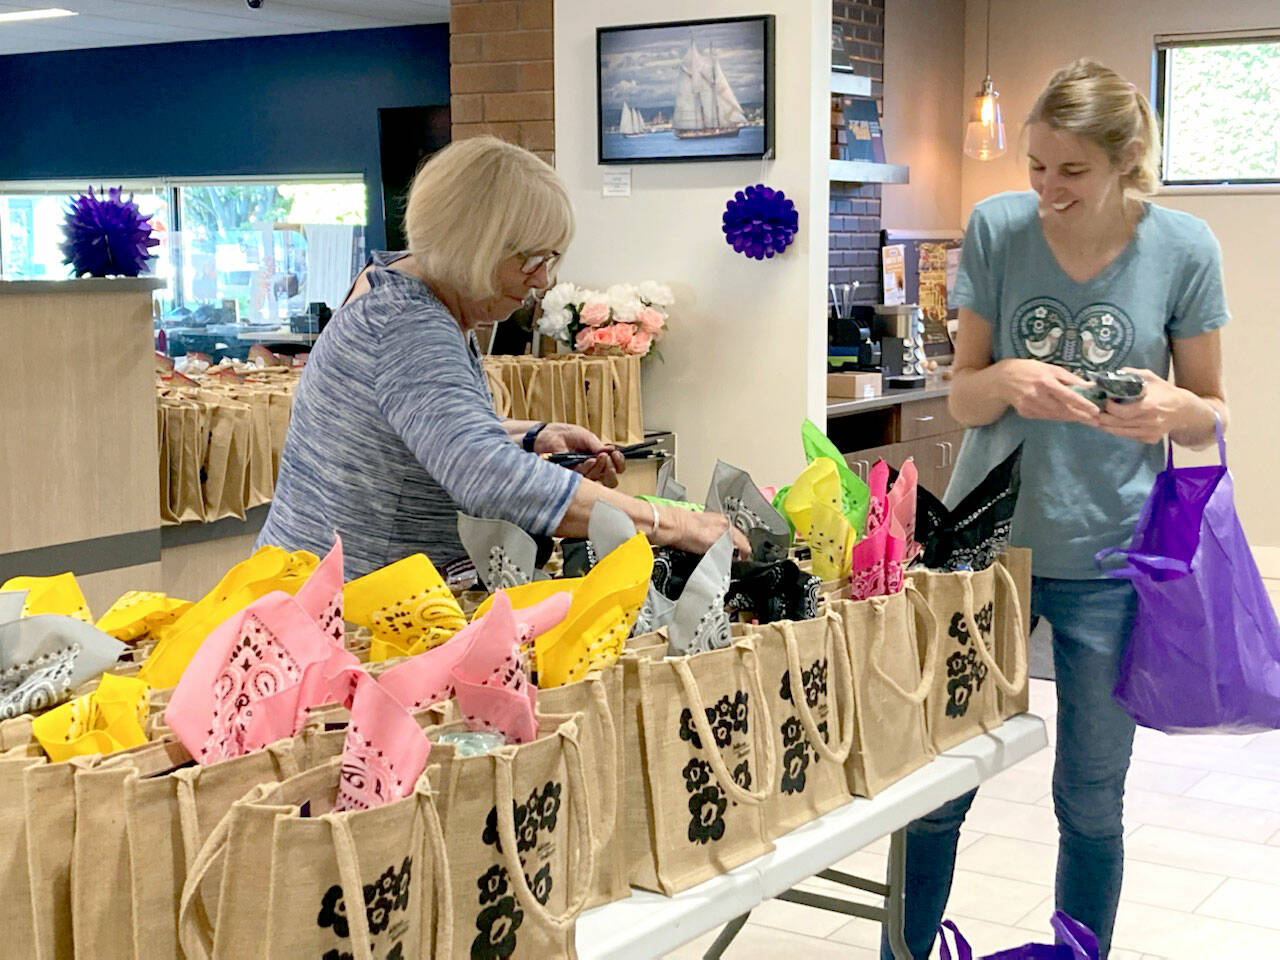 Port Townsend Main Street Program Promotion Committee members Sue Arthur, left, and Jennifer Wake help make 500 goodie bags filled with donations from local merchants and sponsors to be sold at Thursday’s Girls’ Night Out headquarters at Vintage by Port Townsend Vineyards, 725 Water St., starting at 11 a.m. Proceeds from the goodie bag sales support the nonprofit Main Street Program and the Jefferson Healthcare Foundation’s fund to help people in need receive breast and cervical cancer screenings and other services. The event will feature a day and night of shopping at 38 businesses with many open later than usual. The theme is the 1960s “You Go Go Girl!” The wrap party will be at 6 p.m. at Vintage by Port Townsend Vineyards. For more, see ptmainstreet.org.